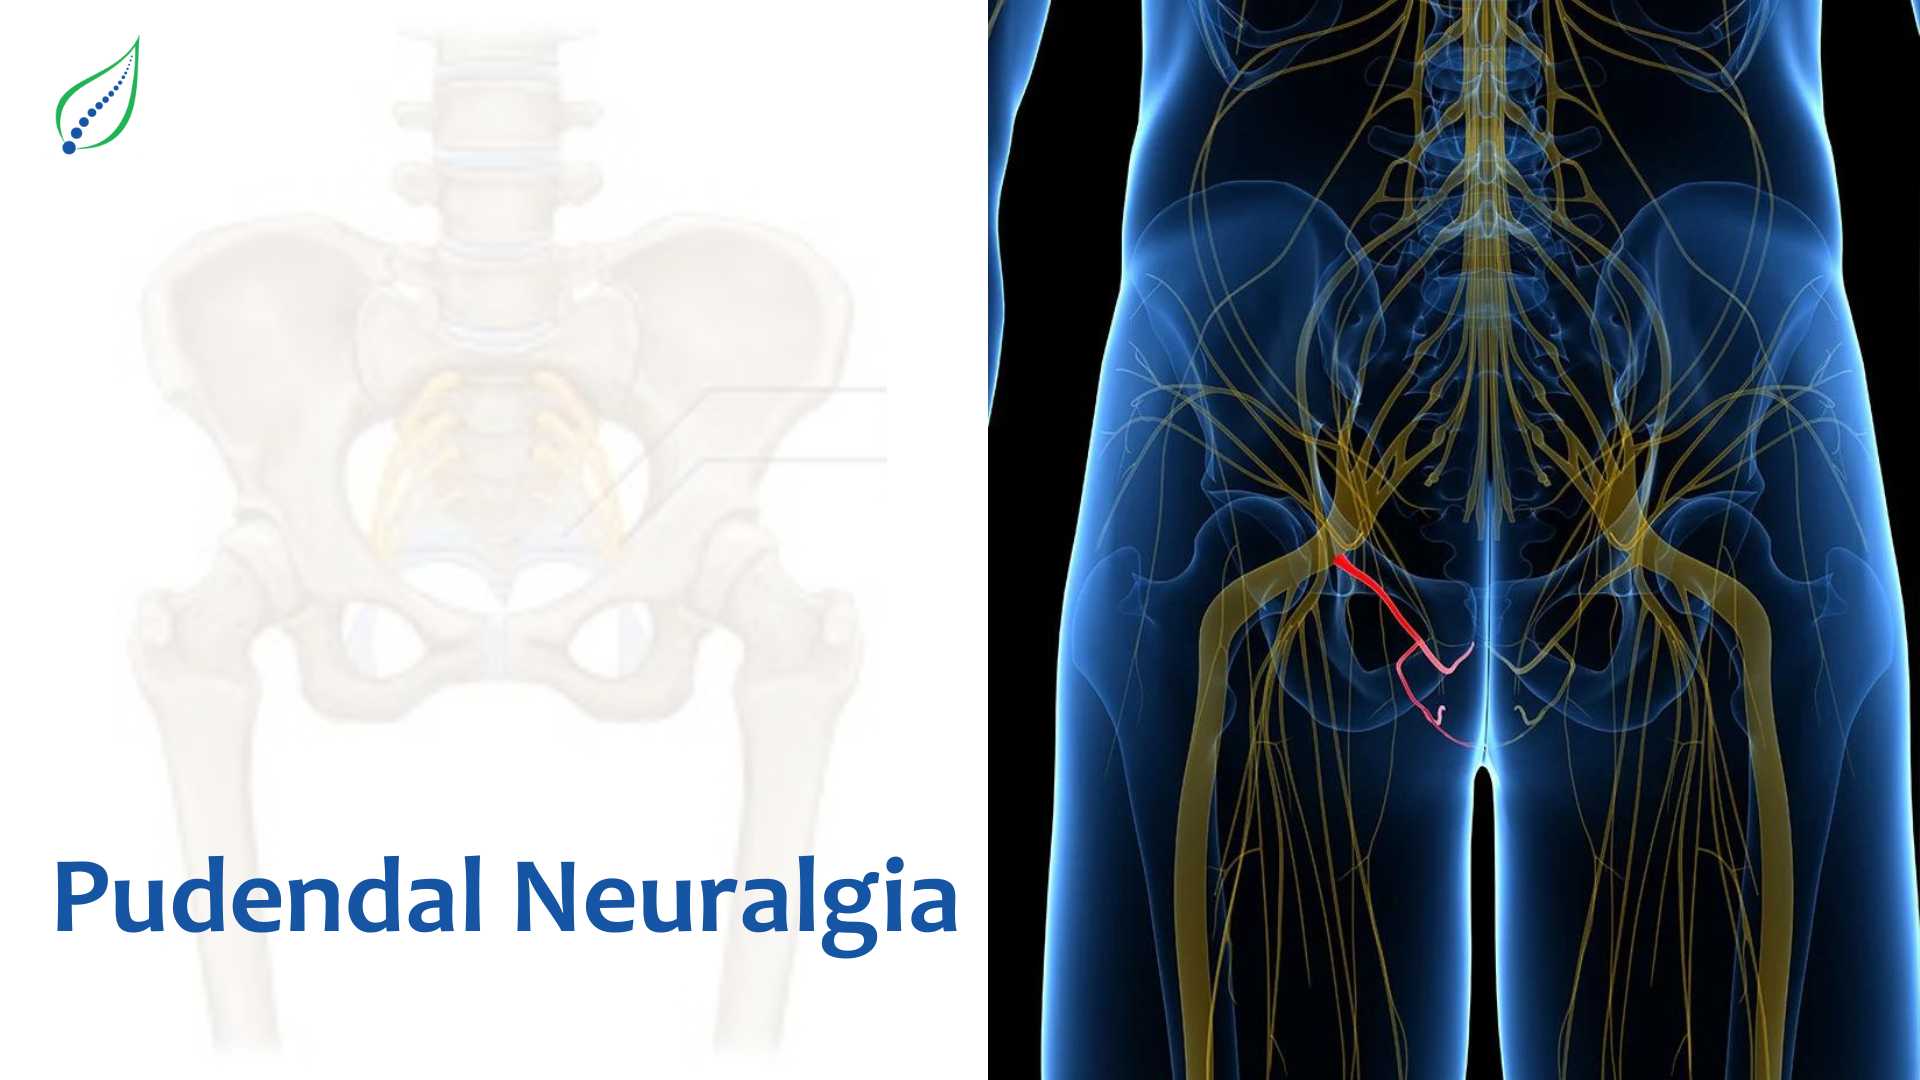 Pudendal Neuralgia : Causes, Symptoms and Treatment